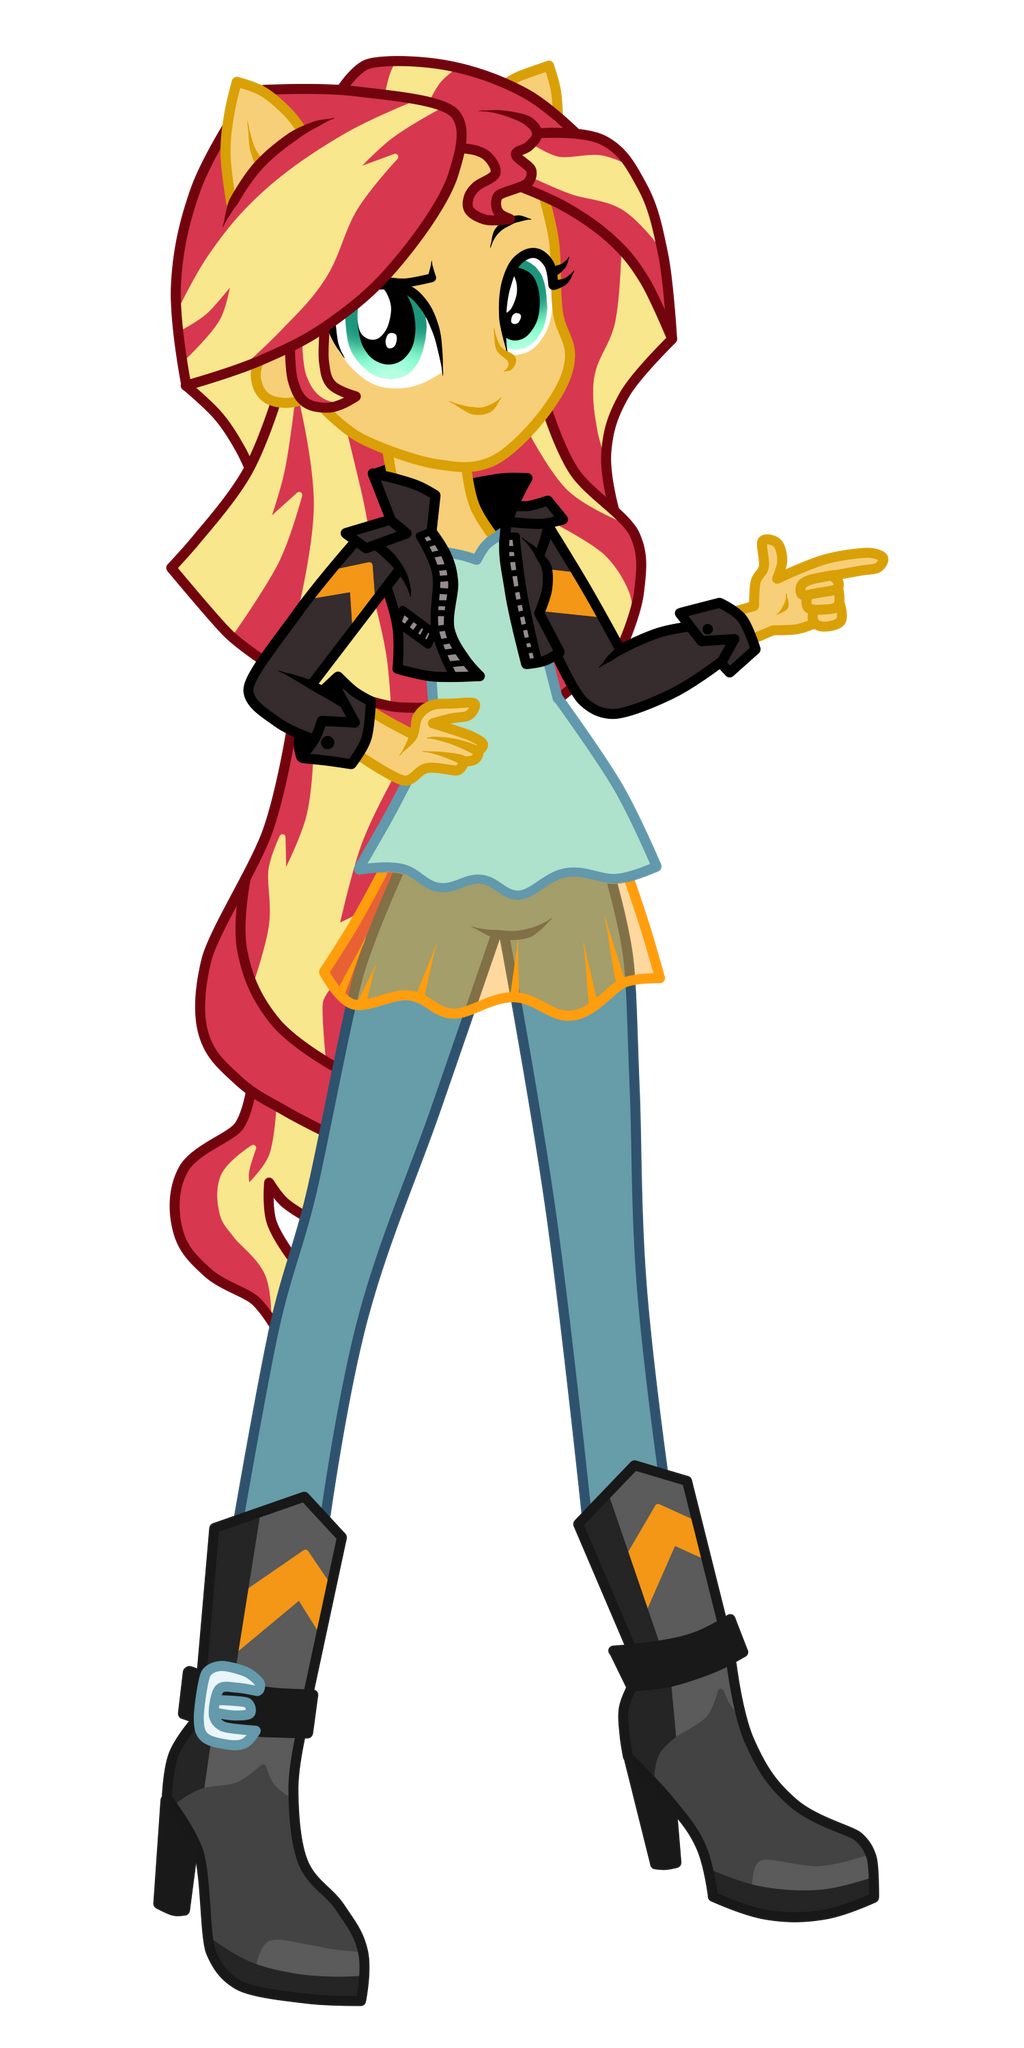 Sunset Shimmer by MixiePie on DeviantArt